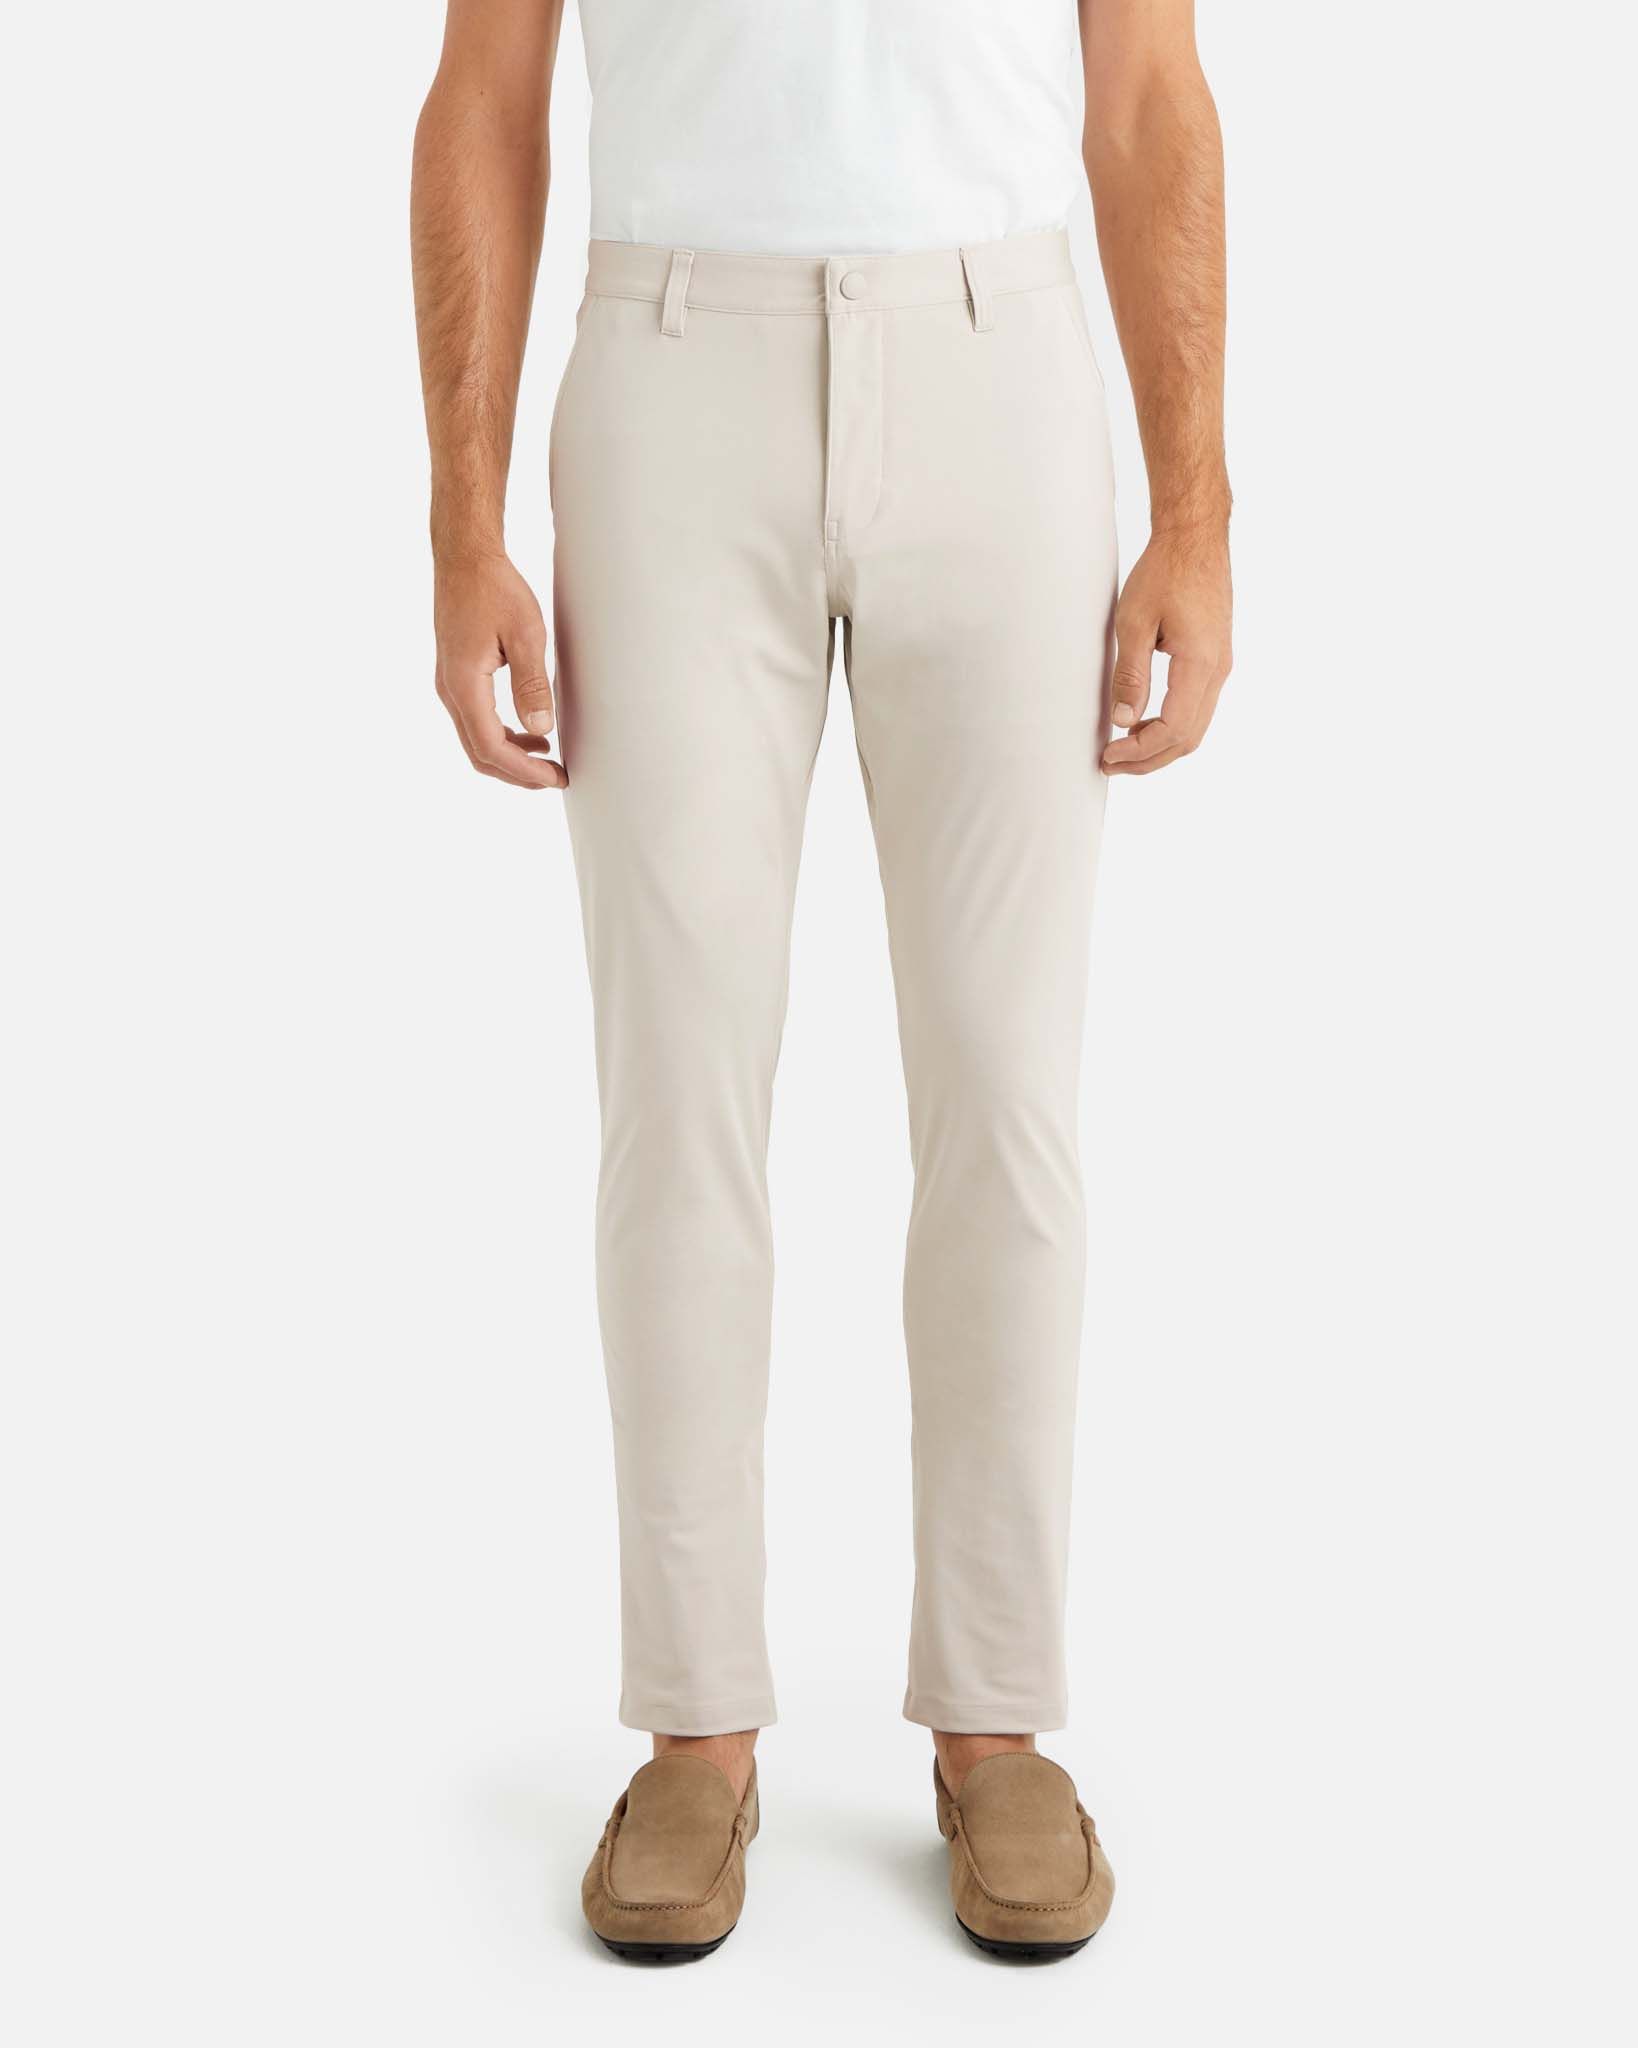 14 Best Chinos for Men 2022 - How to Choose Chino Pants